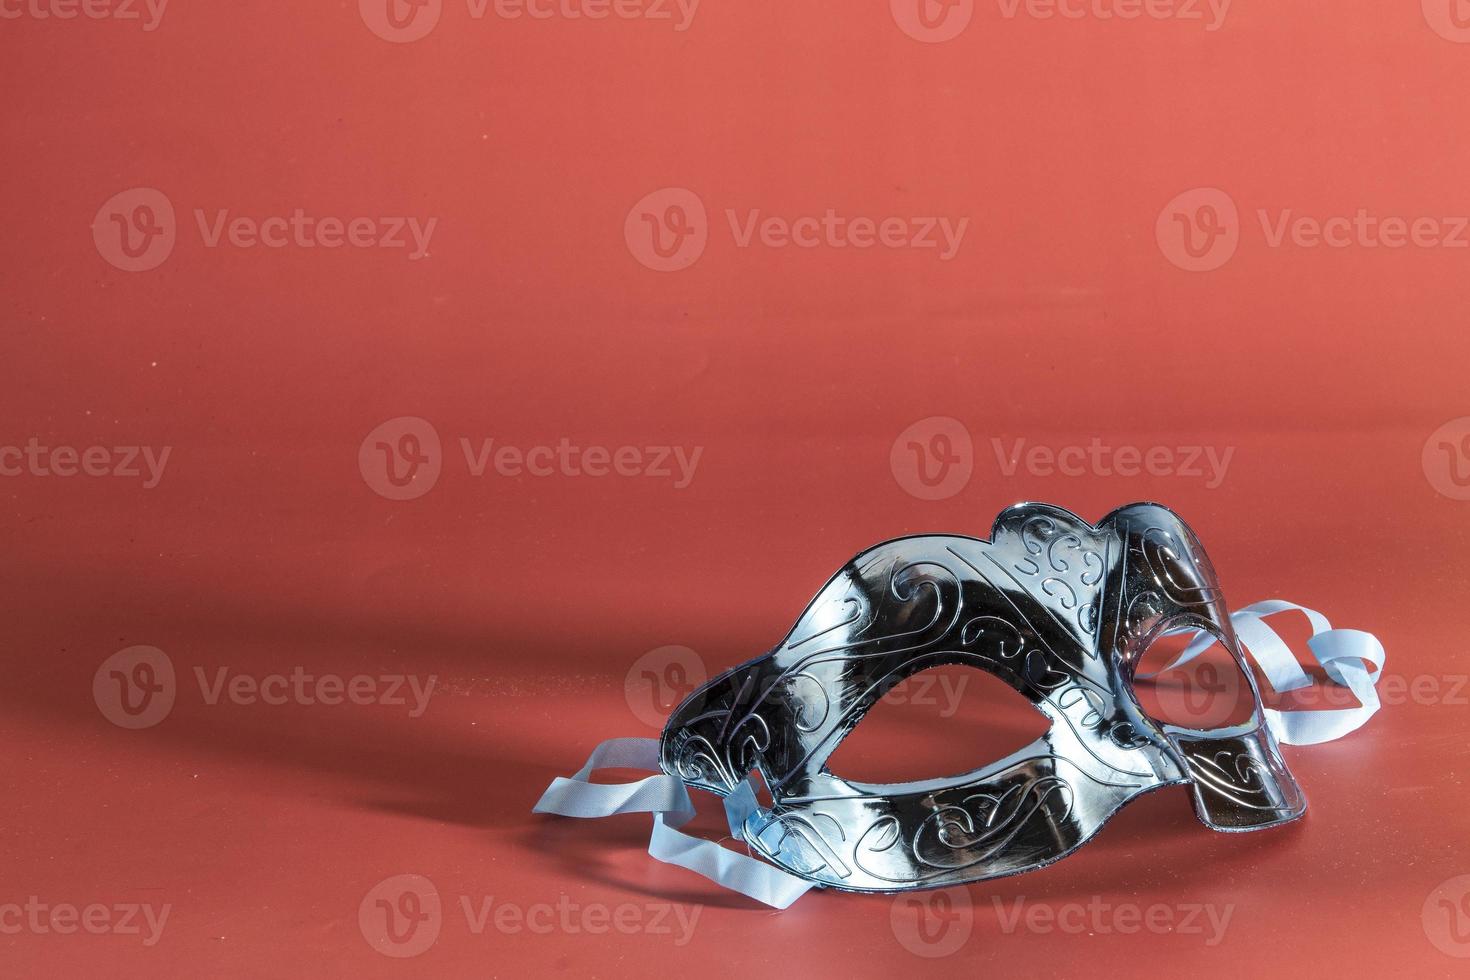 Venetian carnival mask, forming frame in one of the lower corners with space for text photo